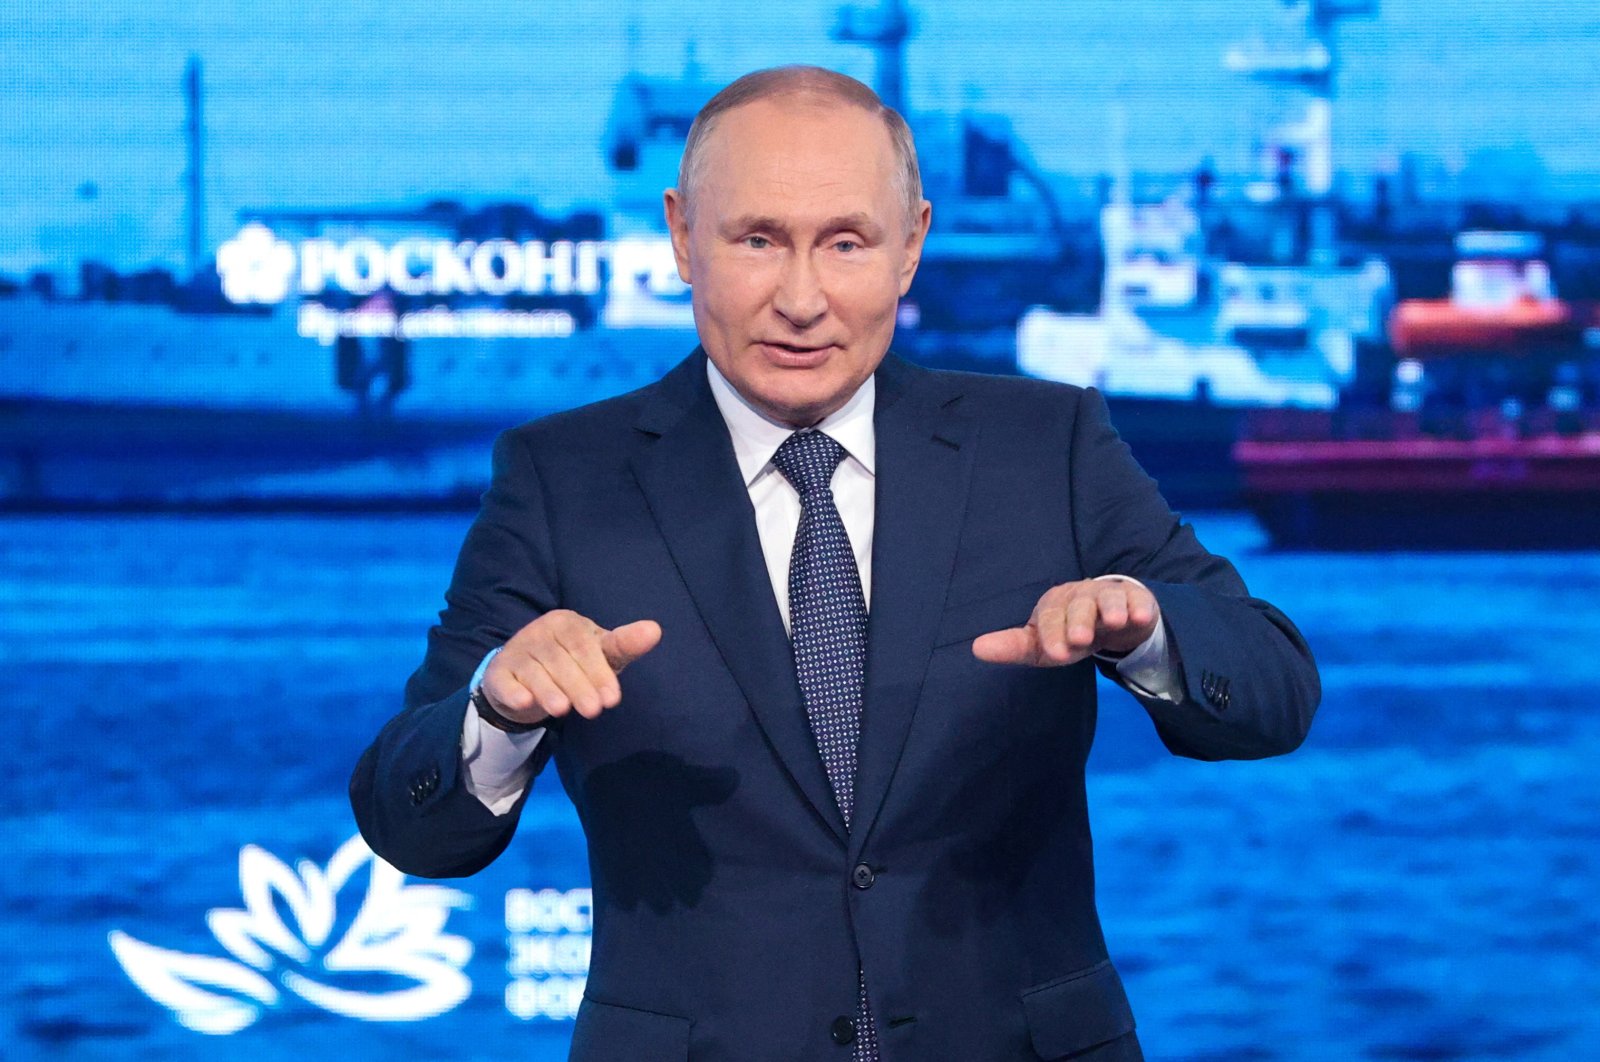 Russian President Vladimir Putin gestures as he delivers a speech during a plenary session at the Eastern Economic Forum in Vladivostok, Russia, Sept. 7, 2022. (Tass via AP)